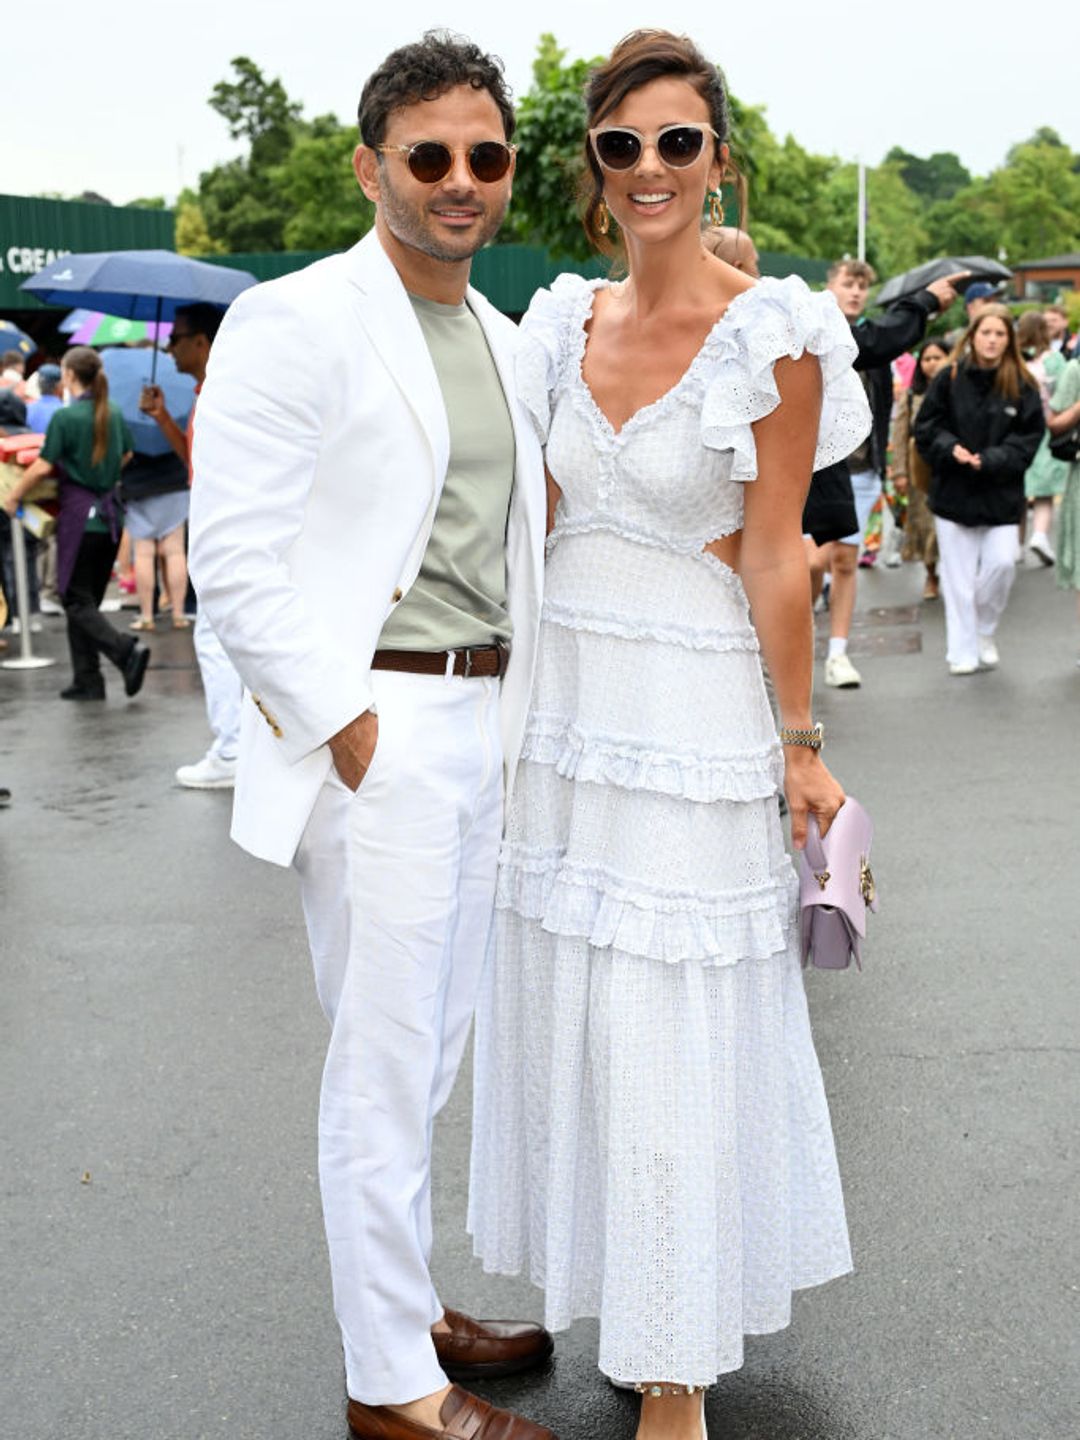 Lucy Mecklenburgh and Ryan Thomas in matching white outfits at Wimbledon